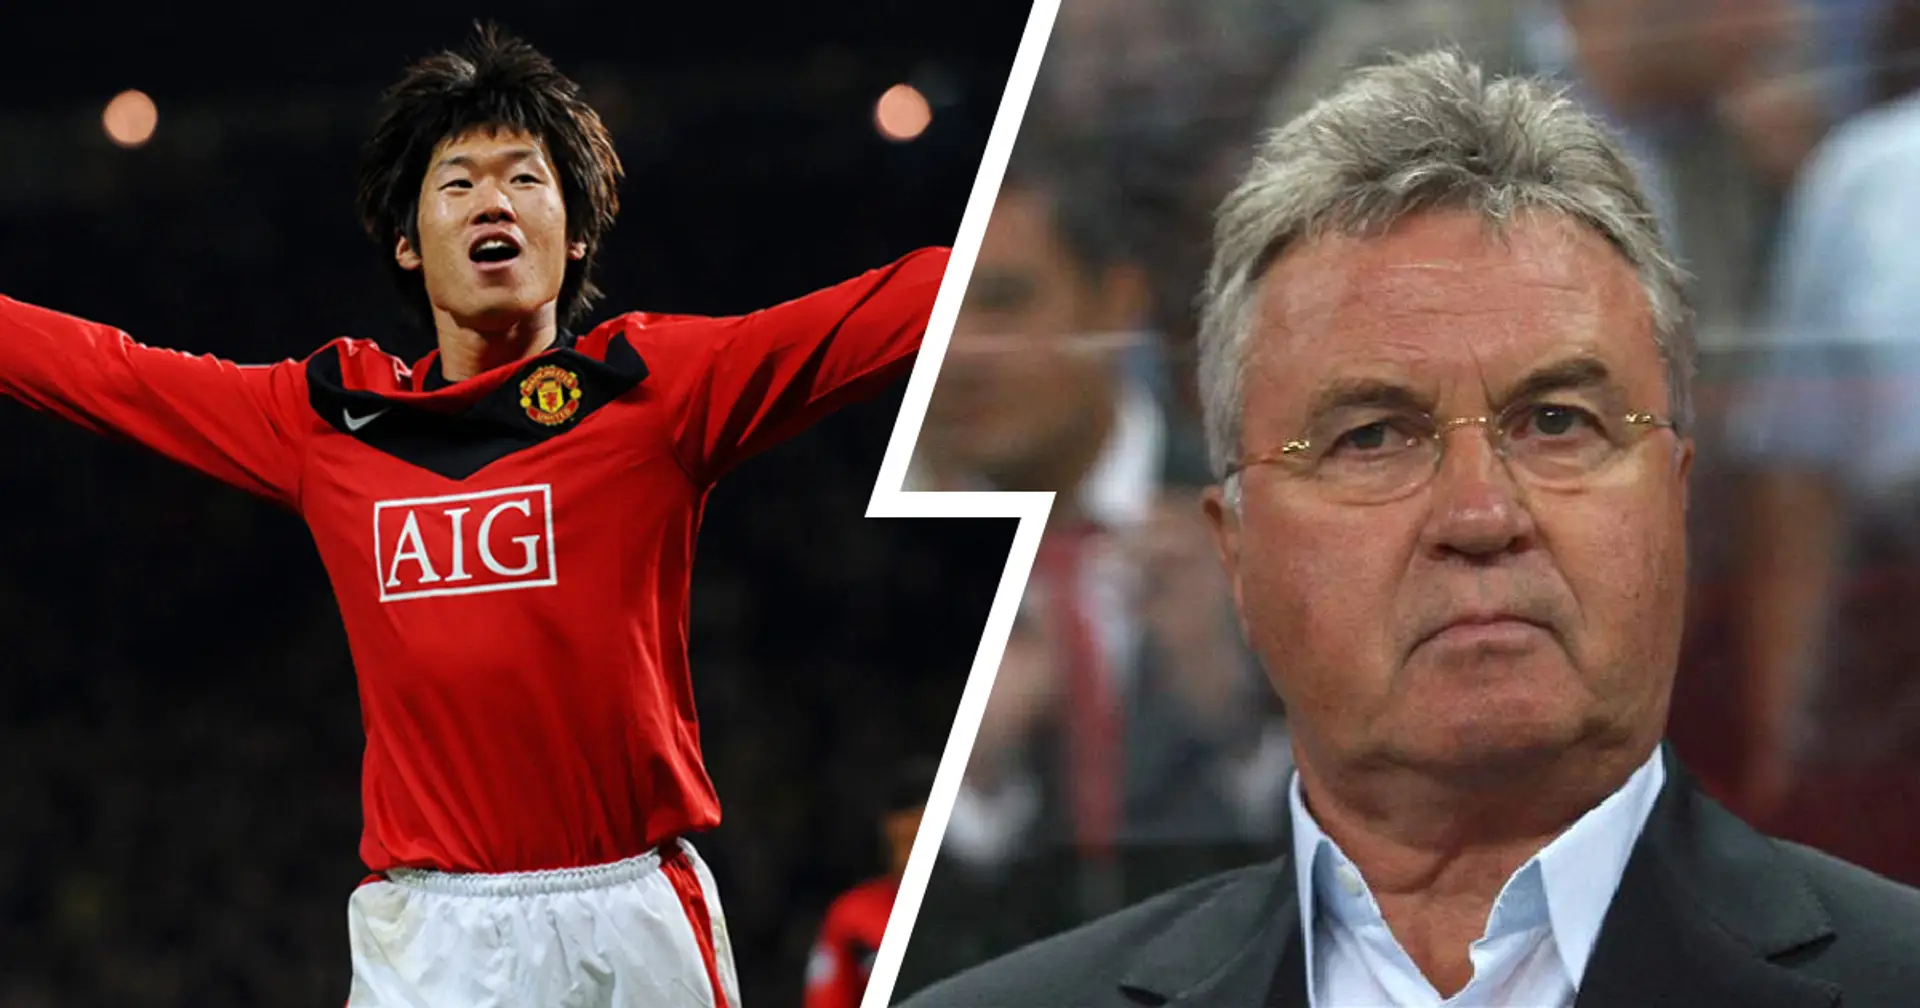 'People were surprised I took him to Europe': How Guus Hiddink explained Park Ji-sung's brilliance